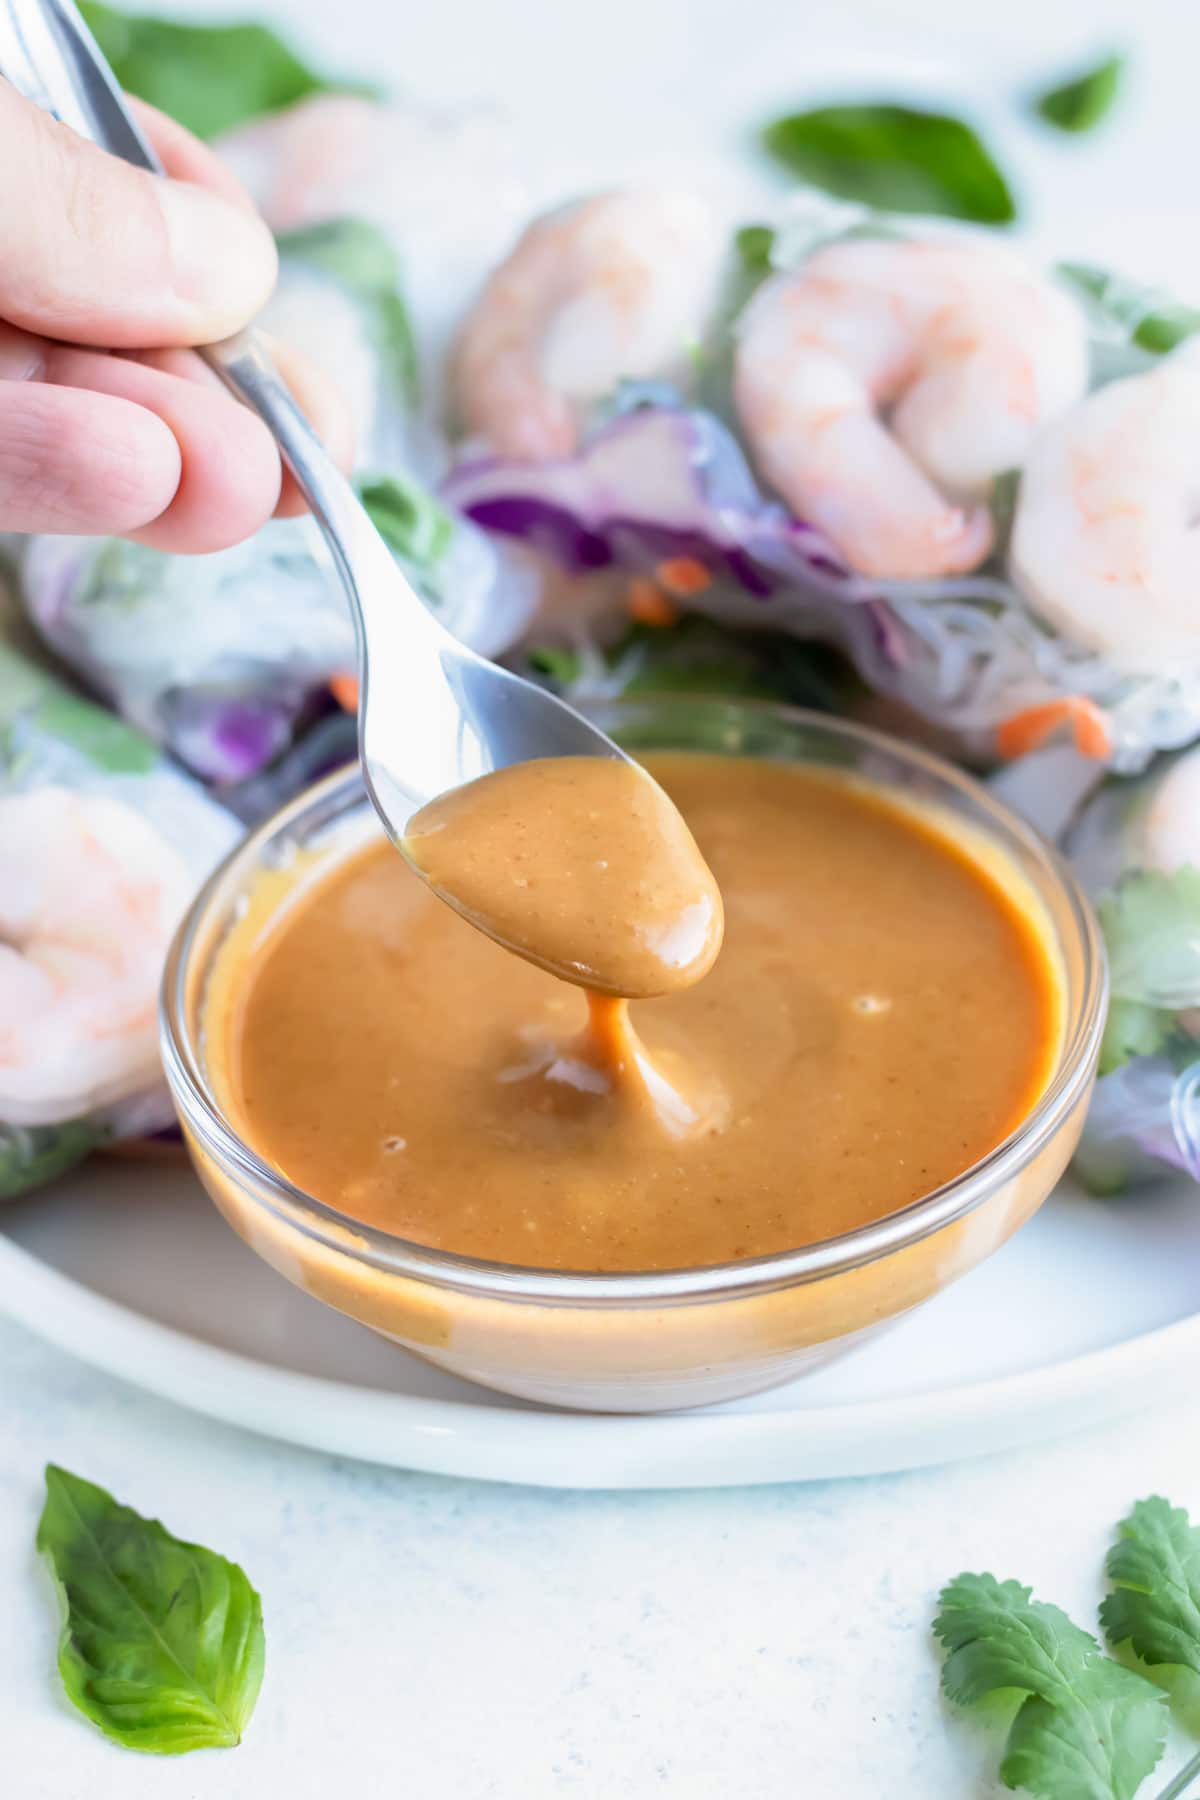 A spoon is used to serve this easy peanut sauce.